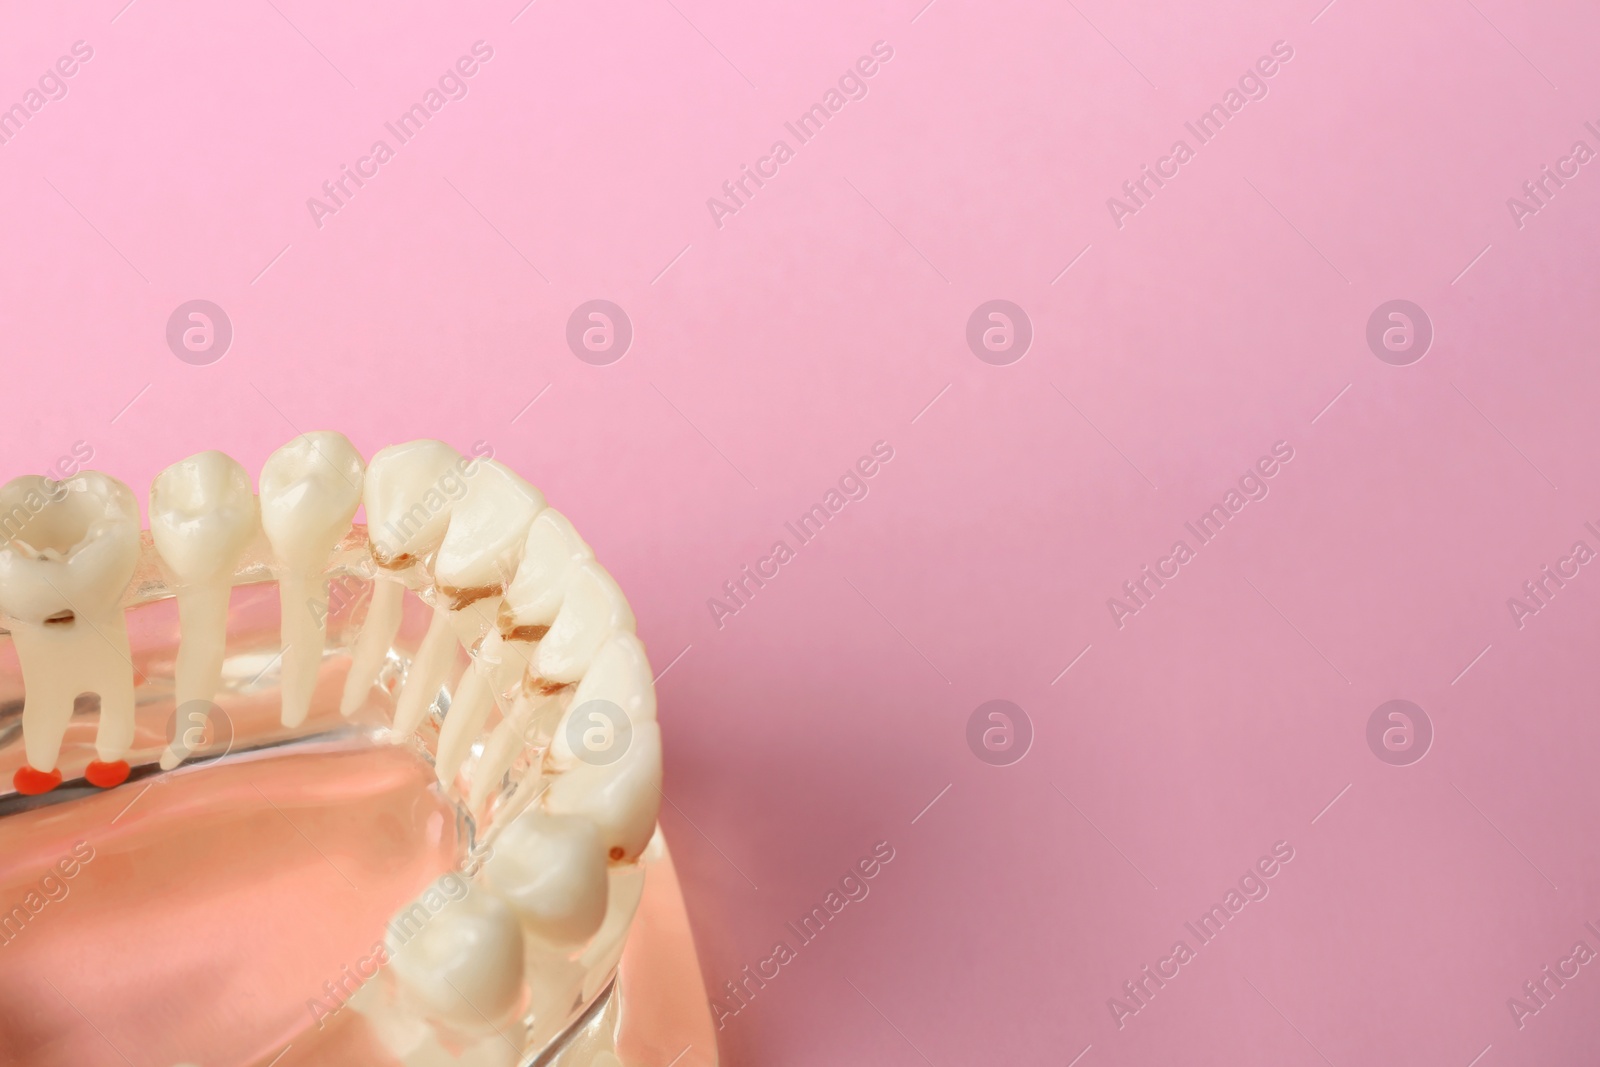 Photo of Educational model of oral cavity with teeth on color background. Space for text